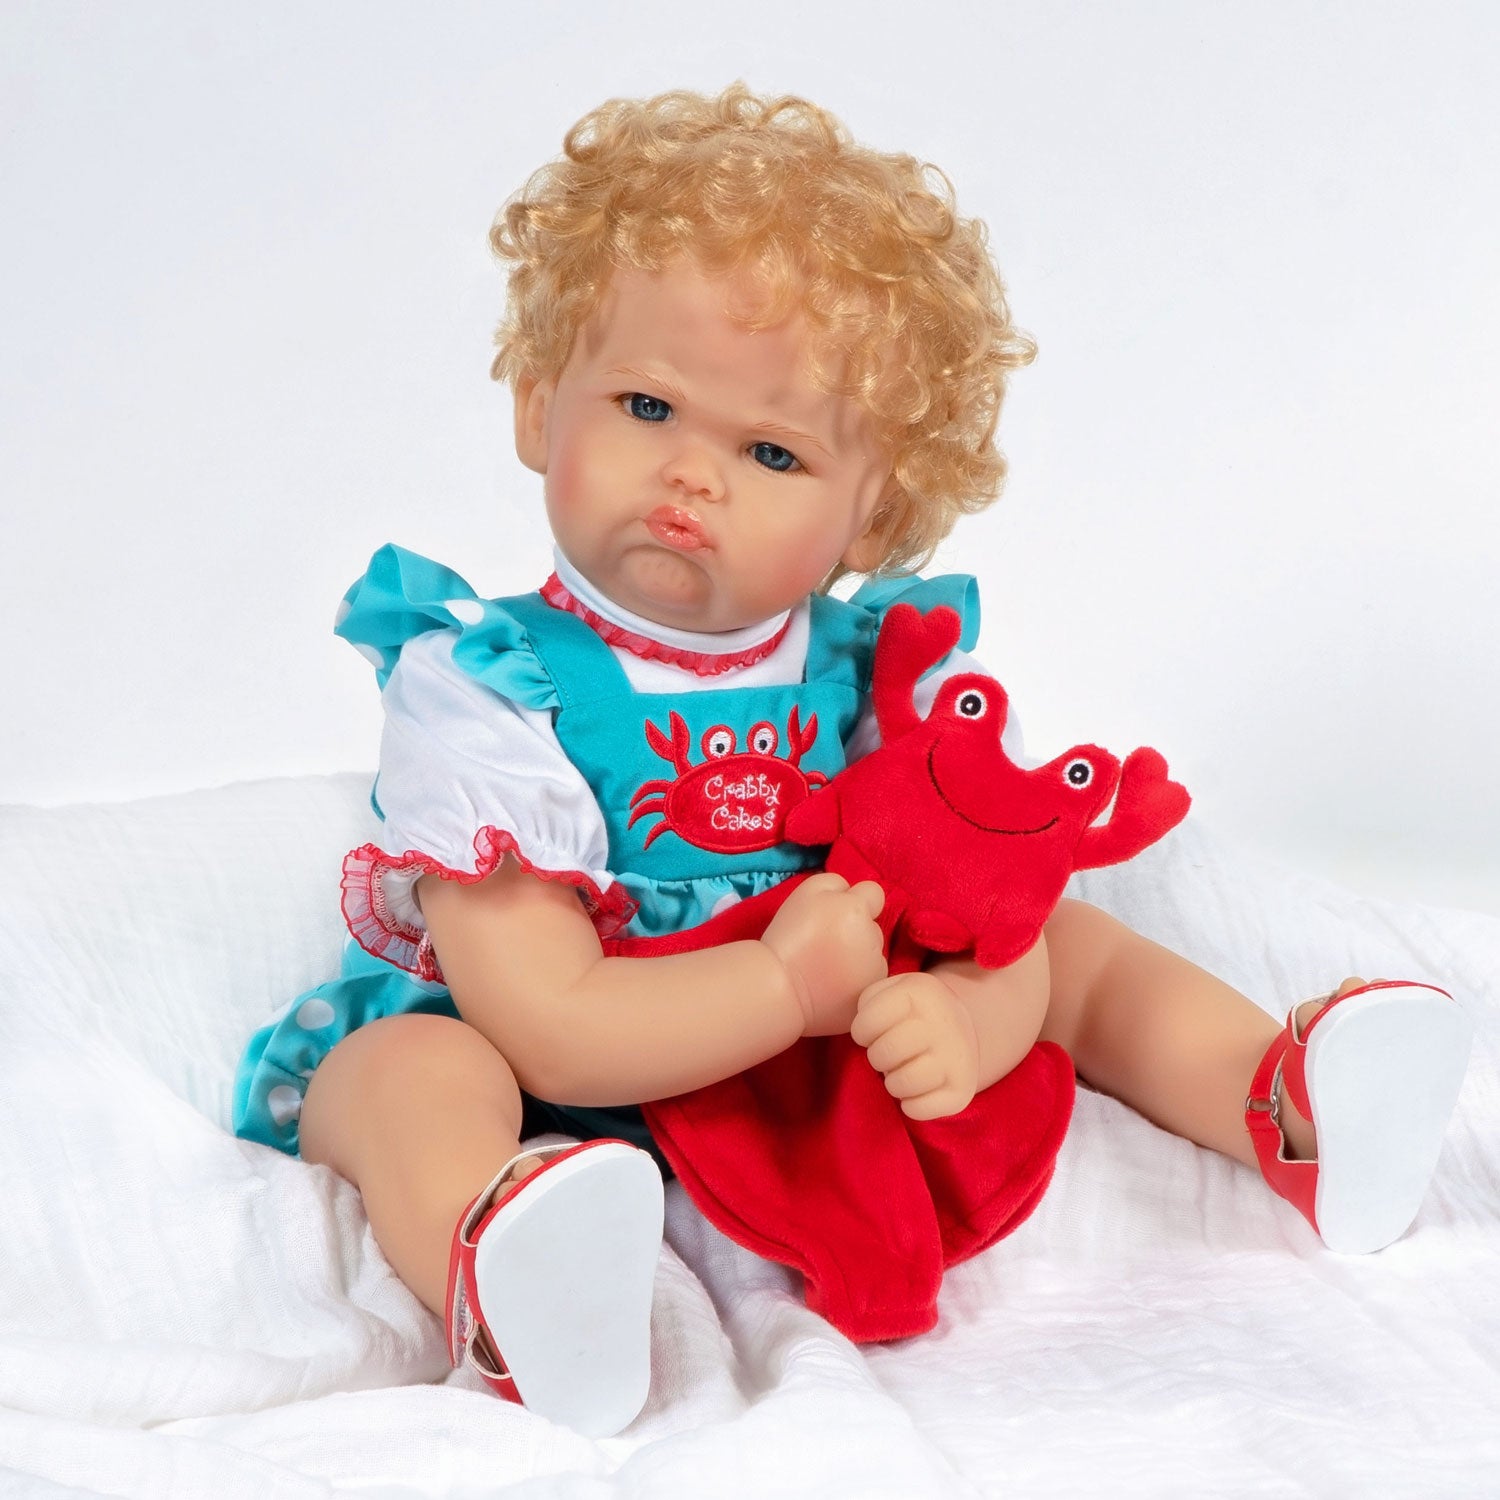 Paradise Galleries Crabby Cakes - Realistic Grumpy Toddler Girl Doll! 22 Inch Reborn Doll in GentleTouch Vinyl by Reborn Artist, Ping Lau.